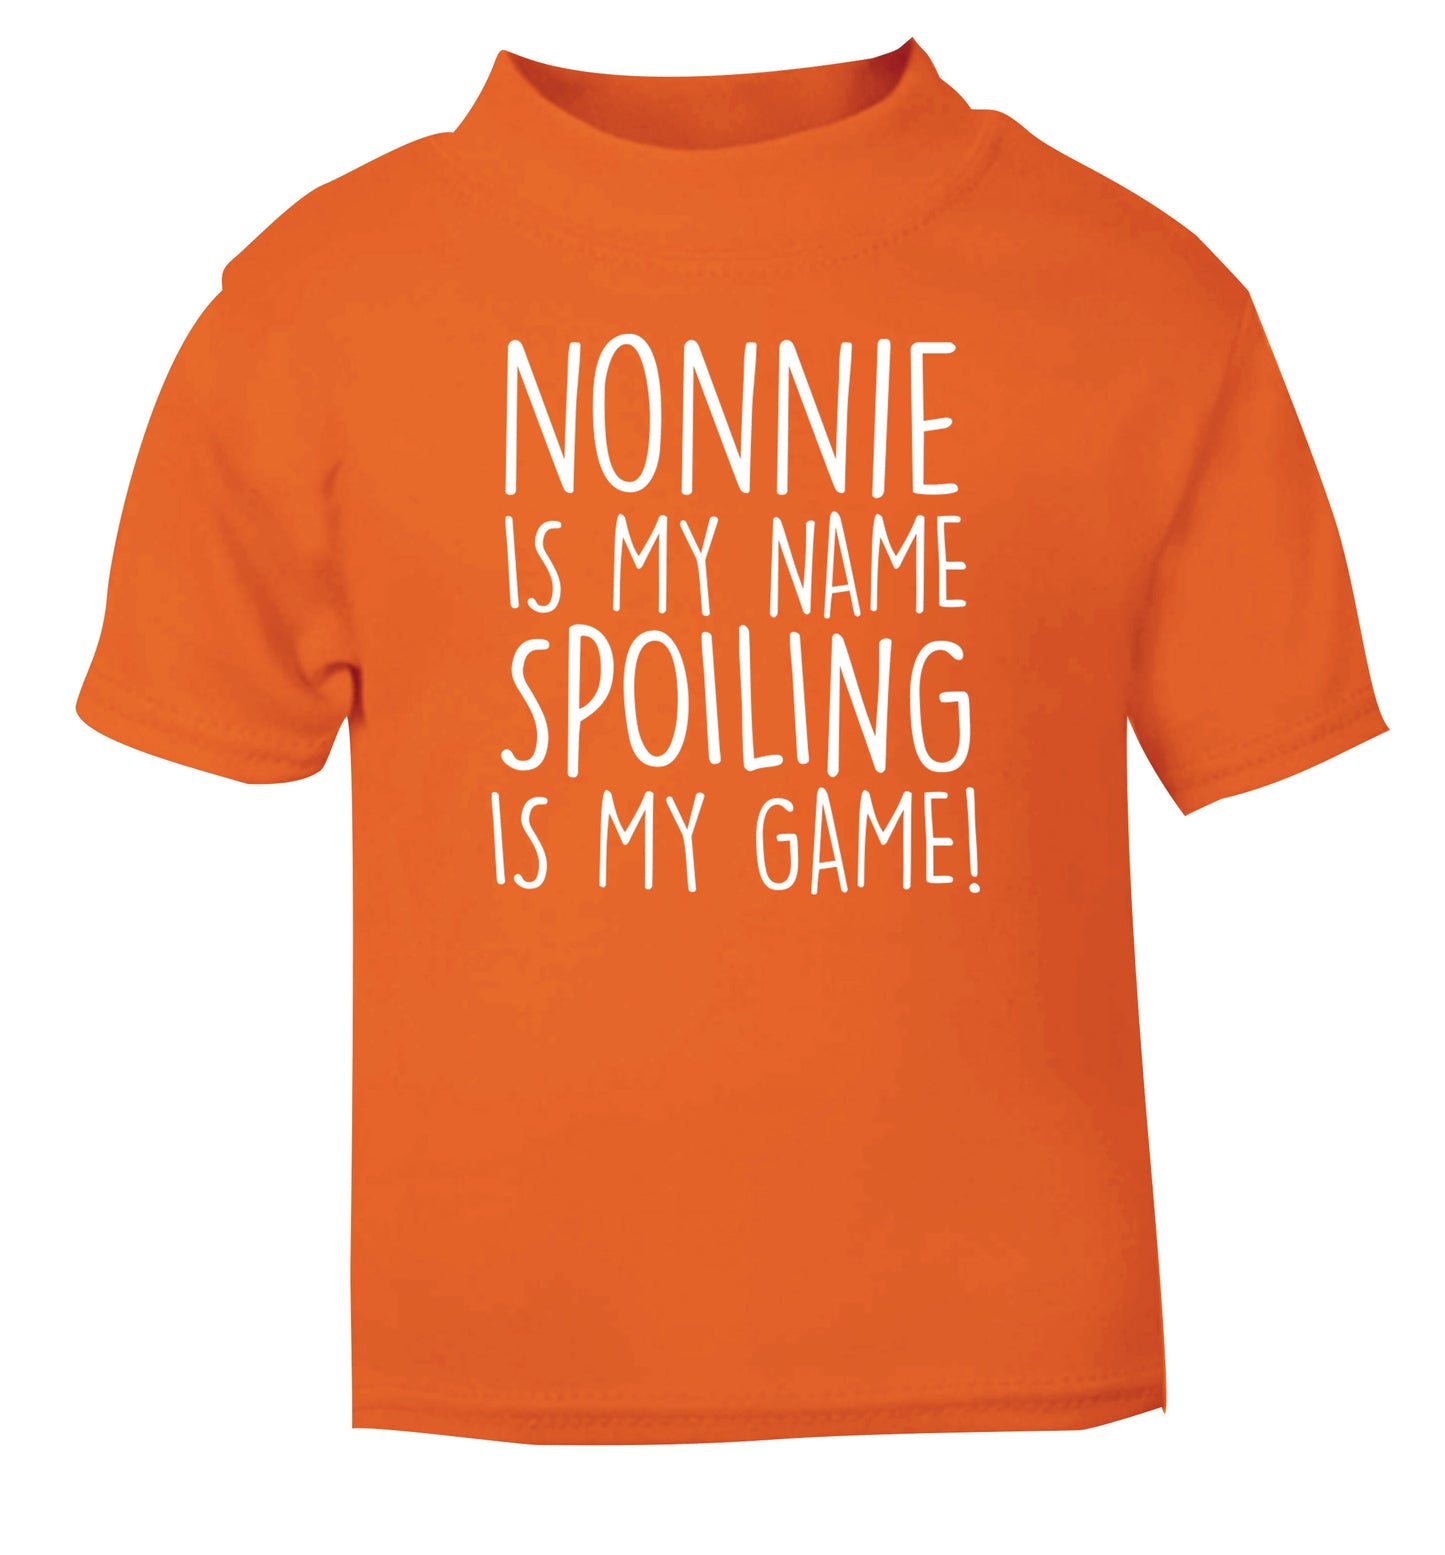 Nonnie is my name, spoiling is my game orange Baby Toddler Tshirt 2 Years